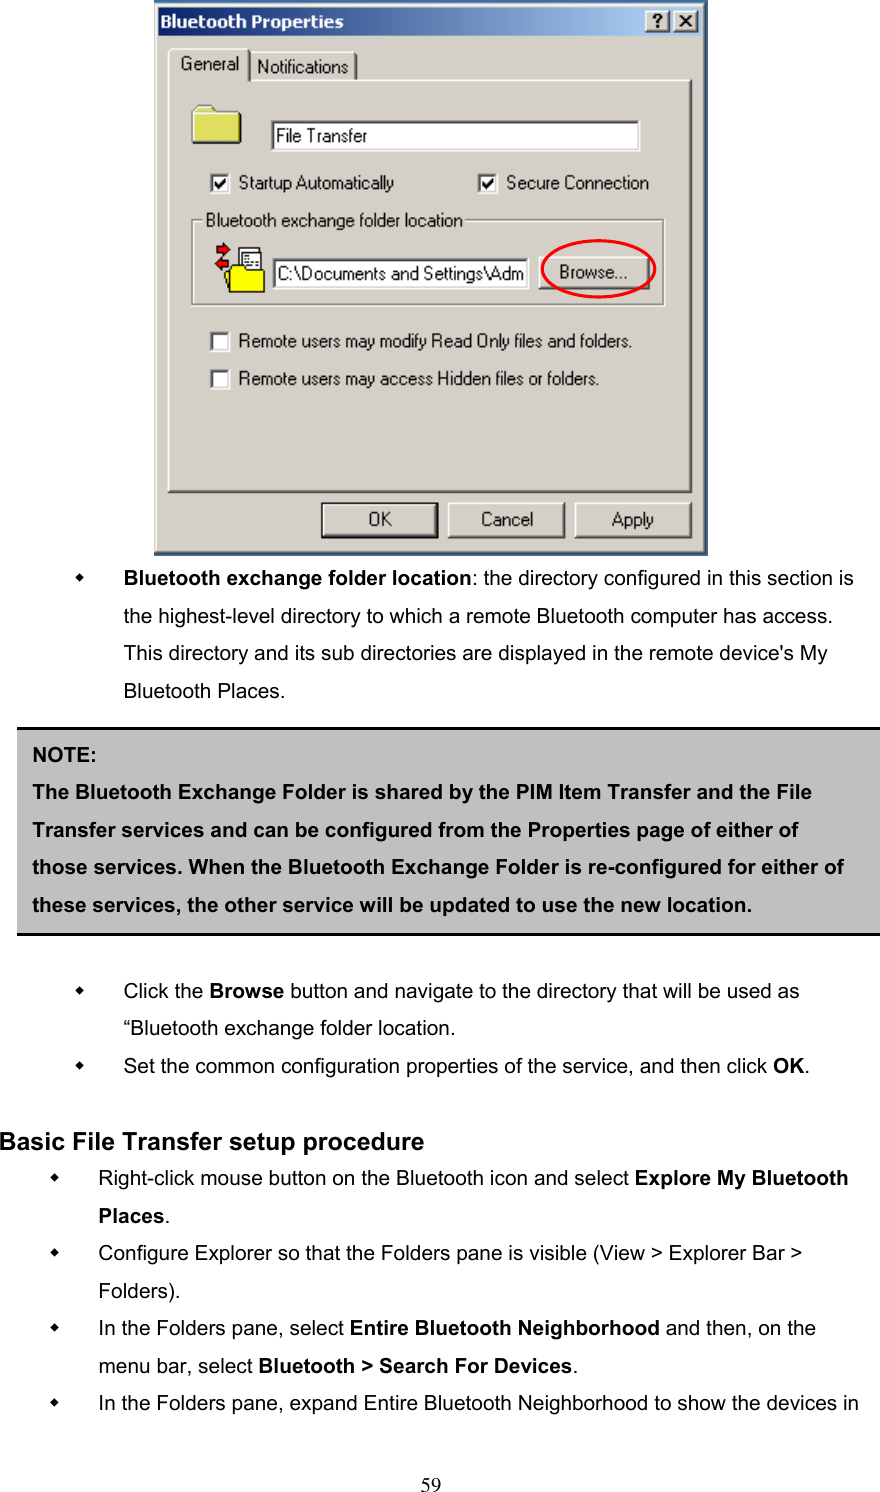    Bluetooth exchange folder location: the directory configured in this section is the highest-level directory to which a remote Bluetooth computer has access. This directory and its sub directories are displayed in the remote device&apos;s My Bluetooth Places.        NOTE:  The Bluetooth Exchange Folder is shared by the PIM Item Transfer and the File Transfer services and can be configured from the Properties page of either of those services. When the Bluetooth Exchange Folder is re-configured for either of these services, the other service will be updated to use the new location.   Click the Browse button and navigate to the directory that will be used as “Bluetooth exchange folder location.   Set the common configuration properties of the service, and then click OK.  Basic File Transfer setup procedure   Right-click mouse button on the Bluetooth icon and select Explore My Bluetooth Places.   Configure Explorer so that the Folders pane is visible (View &gt; Explorer Bar &gt; Folders).   In the Folders pane, select Entire Bluetooth Neighborhood and then, on the menu bar, select Bluetooth &gt; Search For Devices.   In the Folders pane, expand Entire Bluetooth Neighborhood to show the devices in  59 